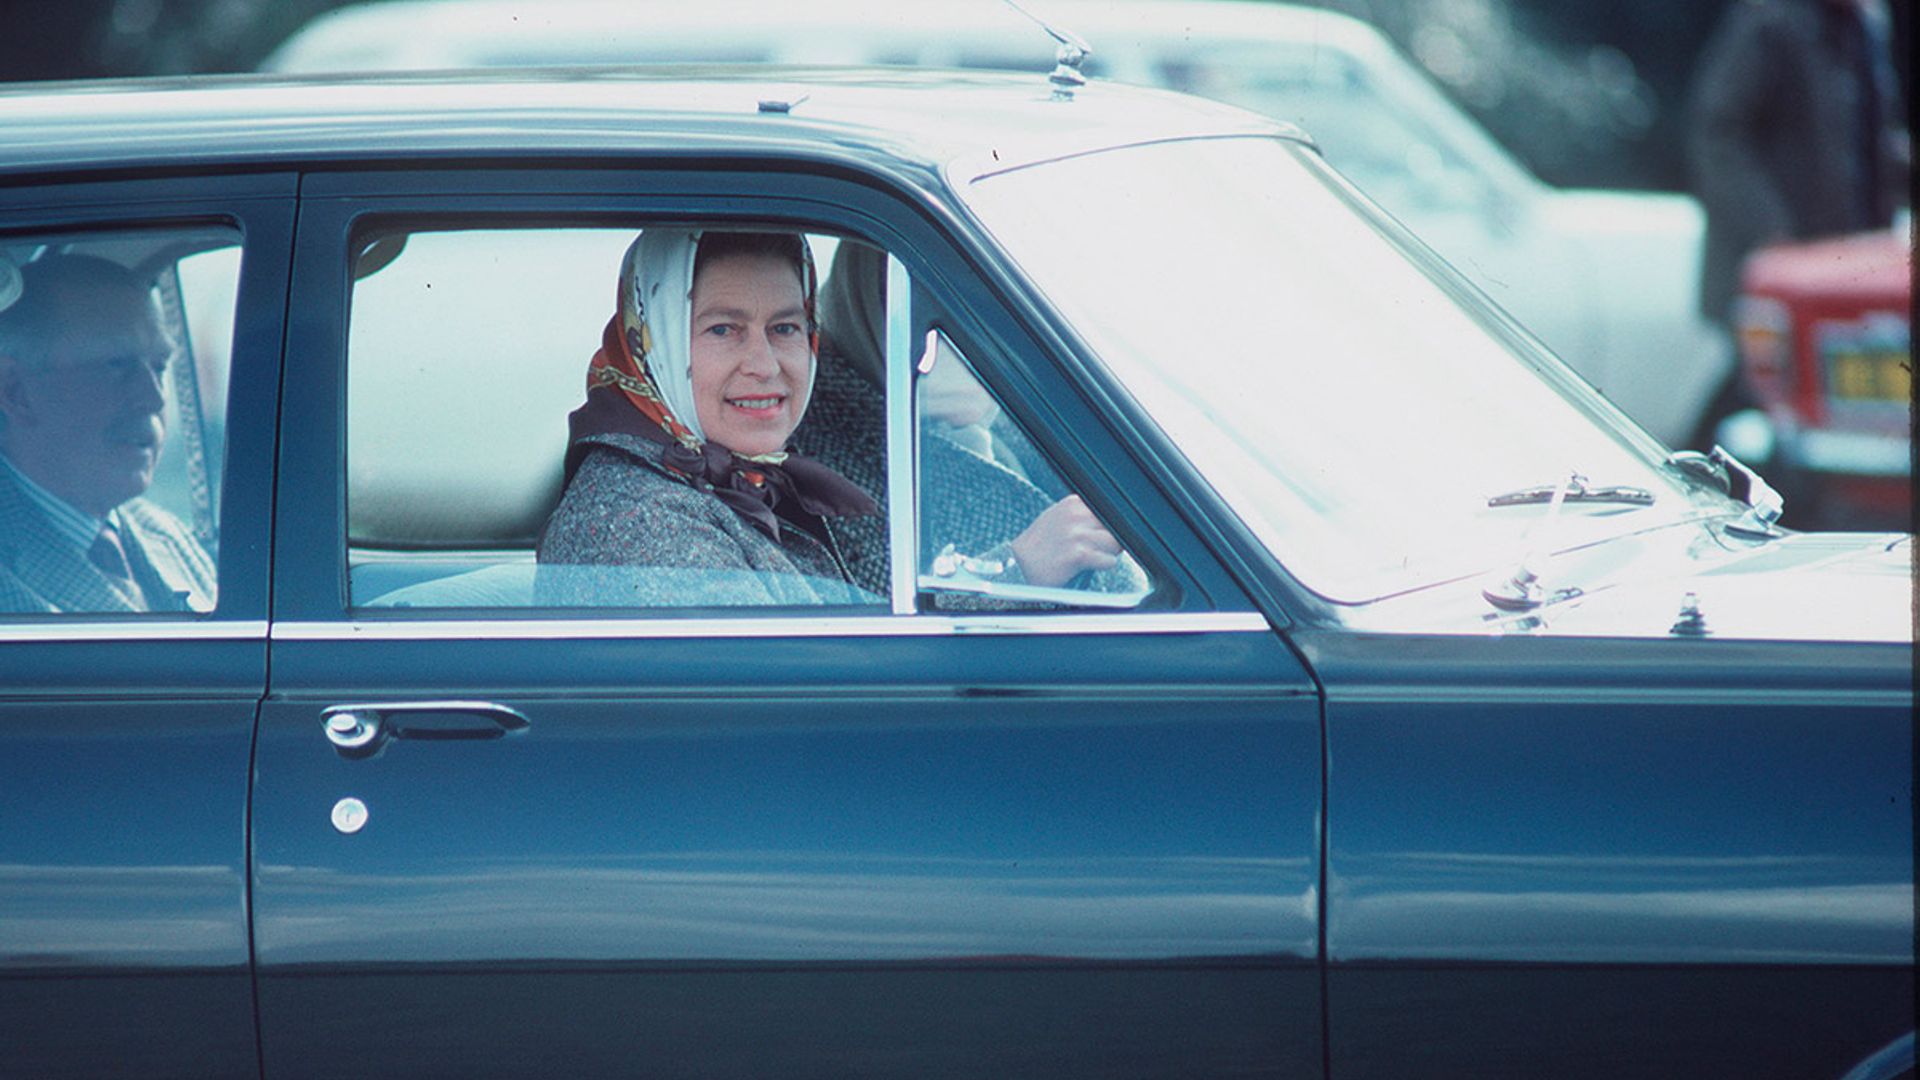 the queen driving without seatbelt